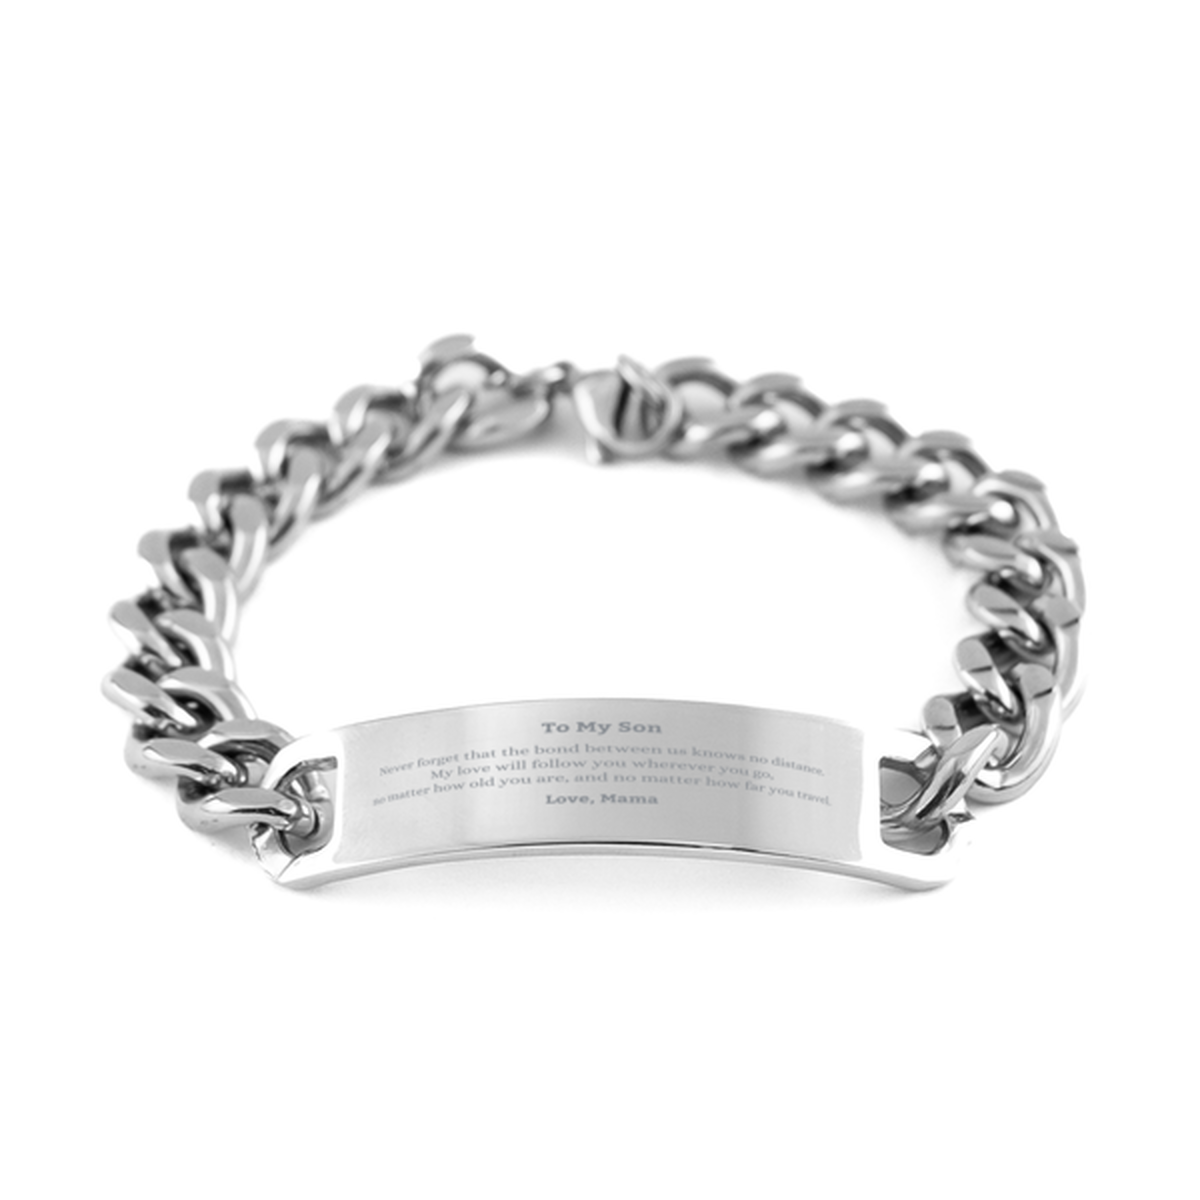 Son Birthday Gifts from Mama, Adjustable Cuban Chain Stainless Steel Bracelet for Son Christmas Graduation Unique Gifts Son Never forget that the bond between us knows no distance. Love, Mama